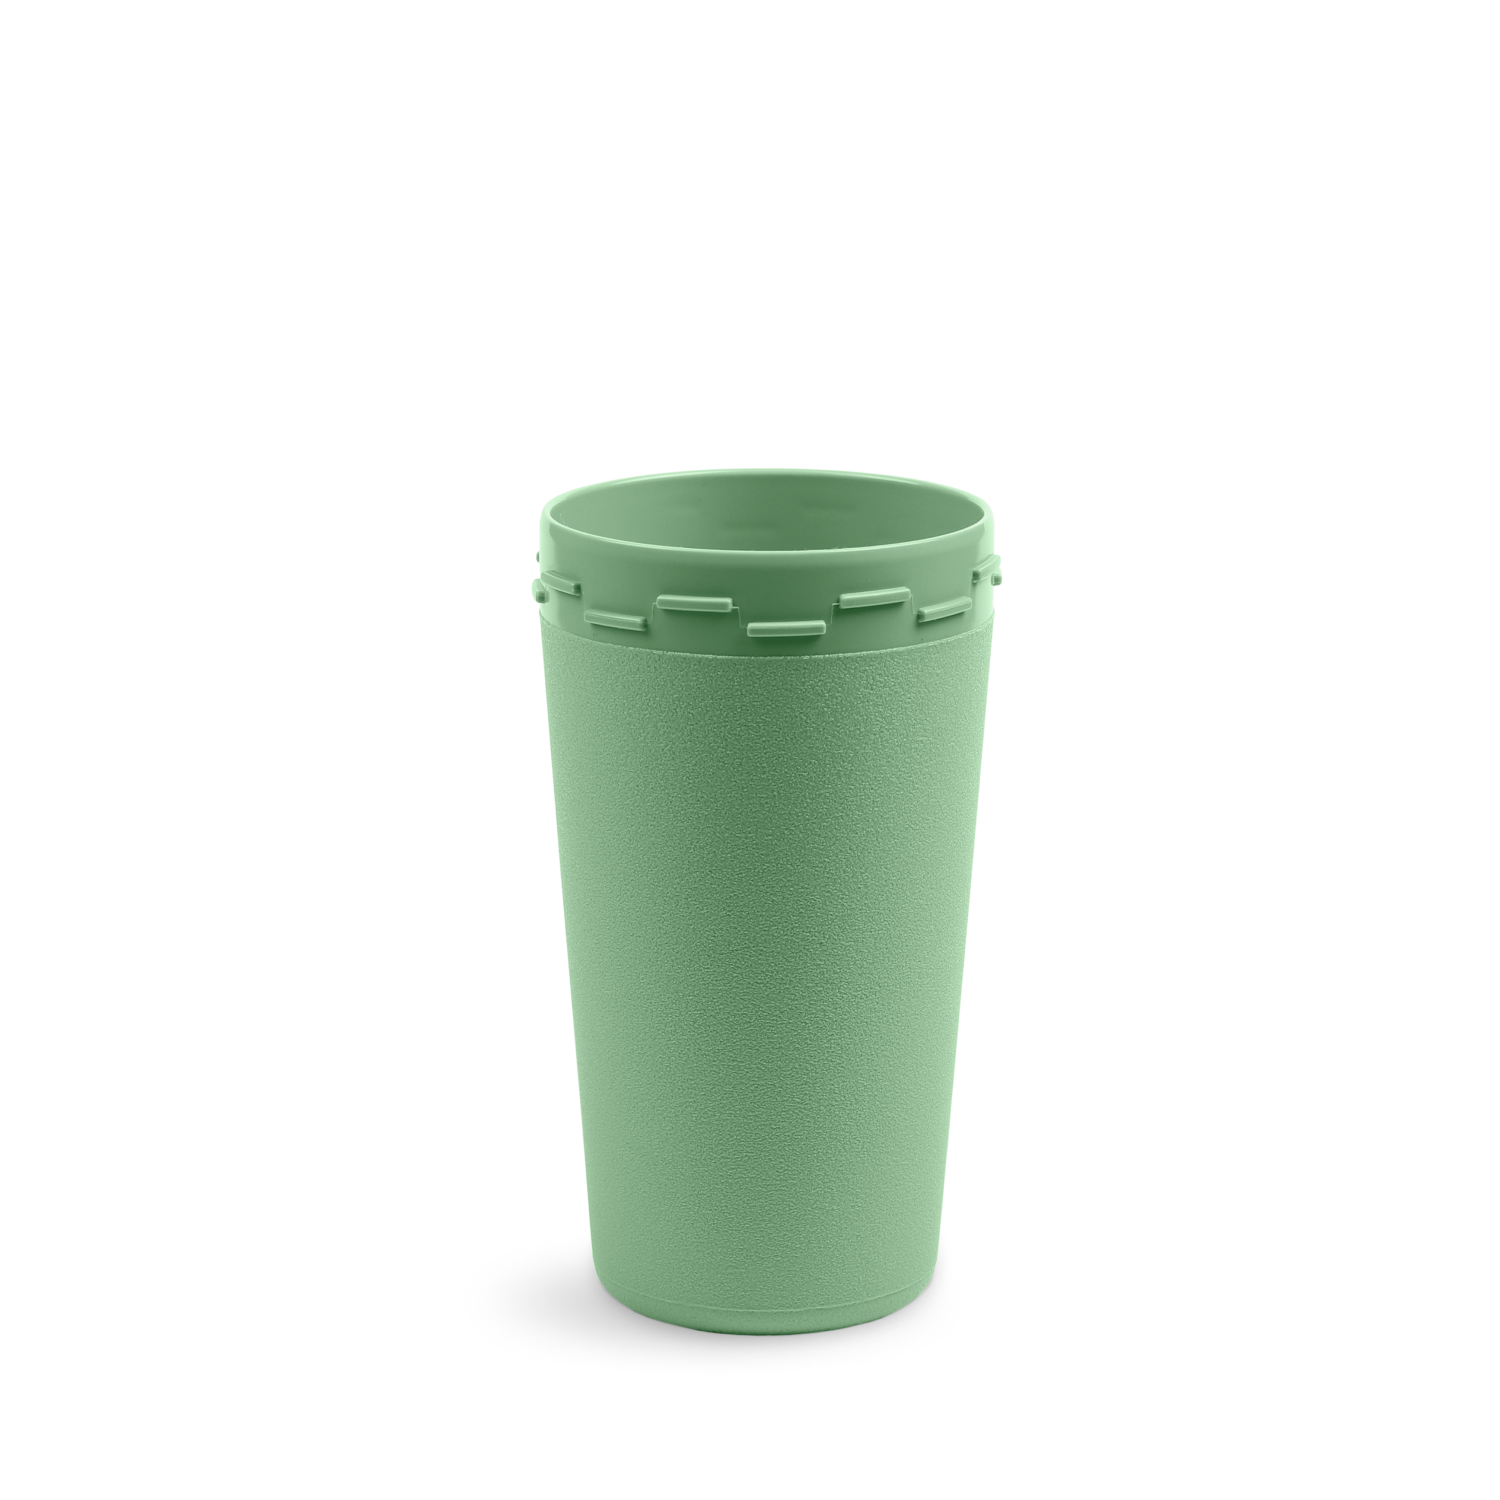 No-Spill & Straw Cup Base